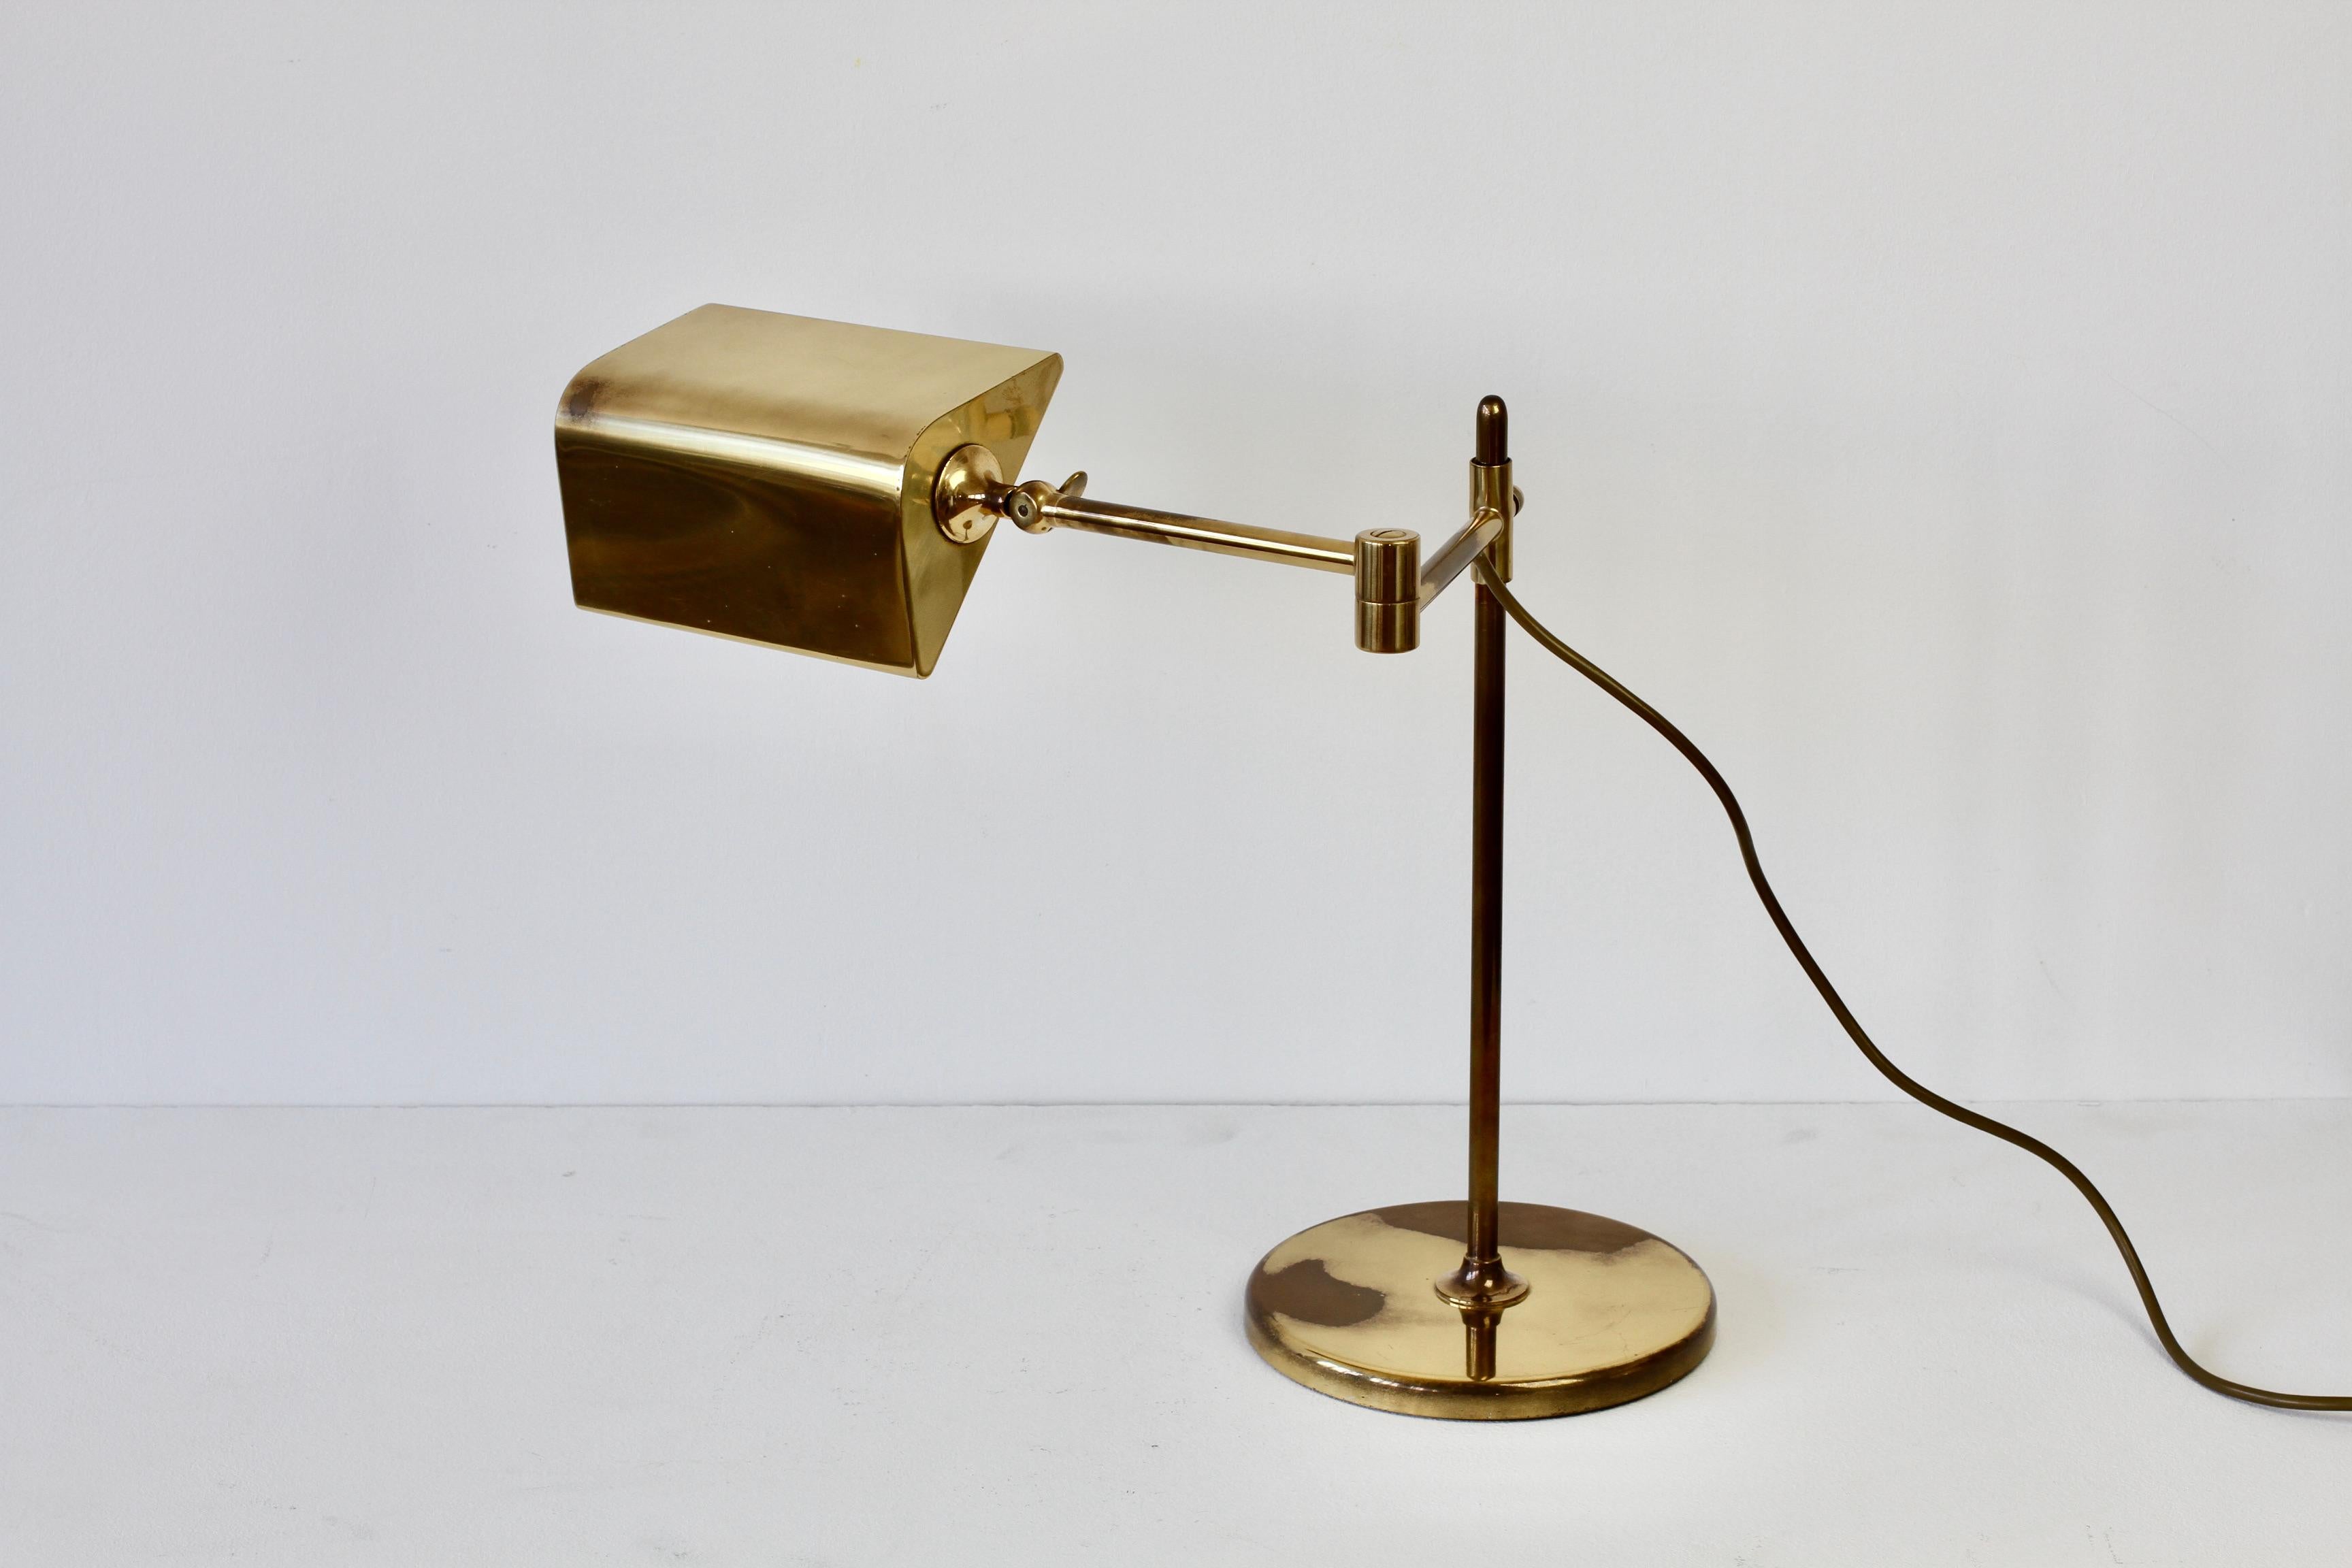 Lacquered Florian Schulz Mid-Century Vintage Modernist Brass Adjustable Table Lamp c.1970 For Sale